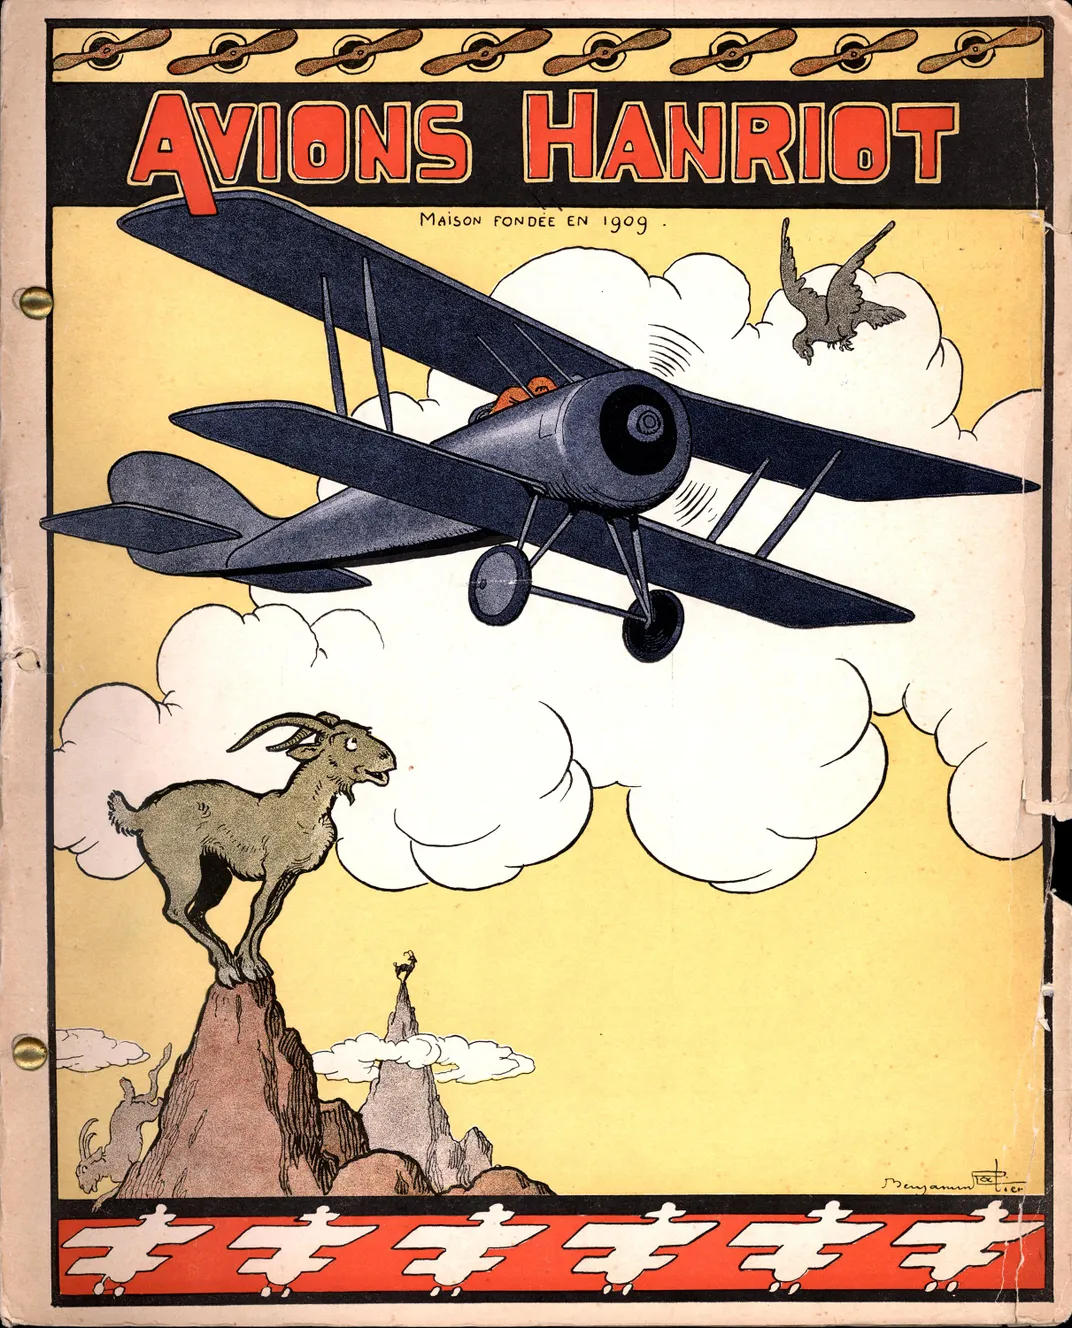 yellow brochure cover with a black plane, goat on a mountain, and the words Avions Hanriot